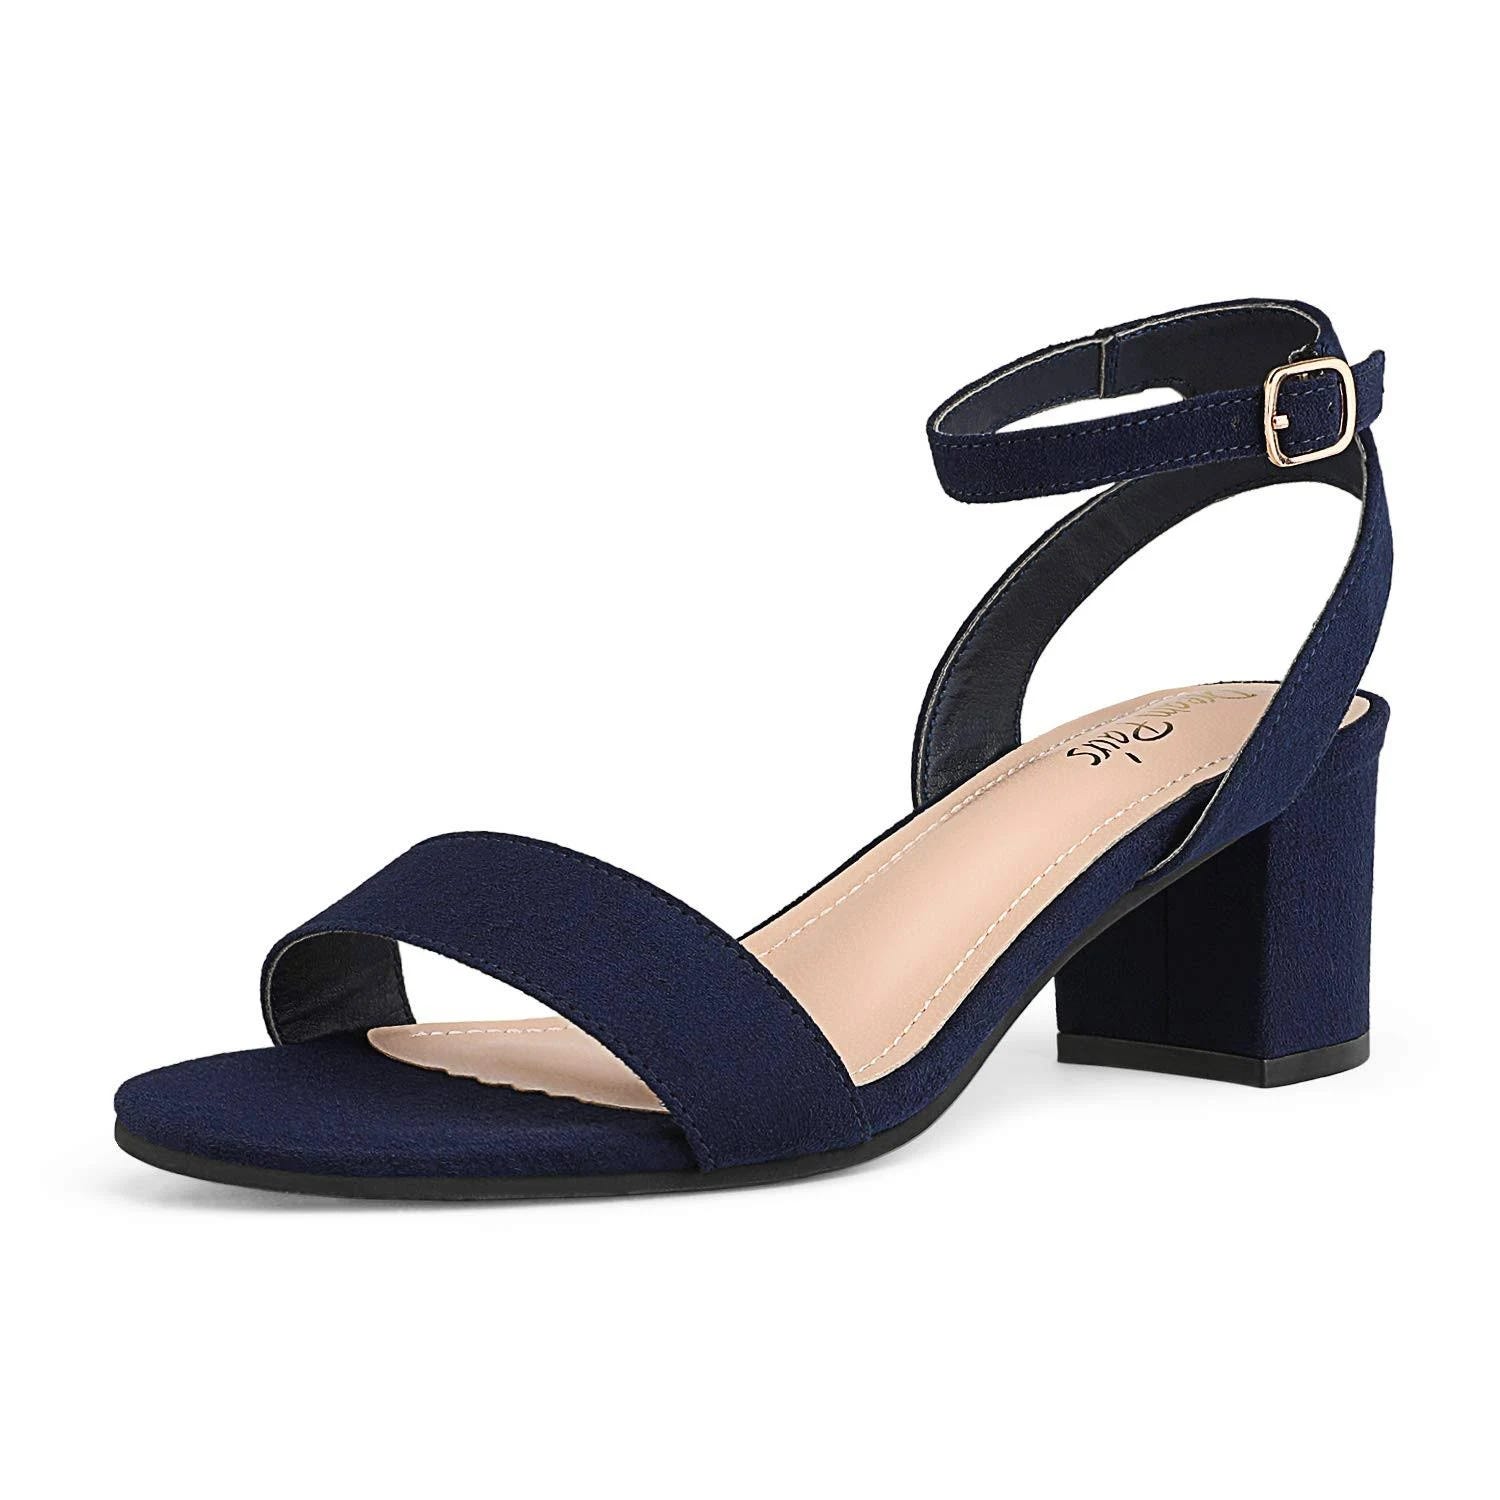 Dream Pairs Women's Navy Blue Heeled Sandals with Comfortable Lining | Image